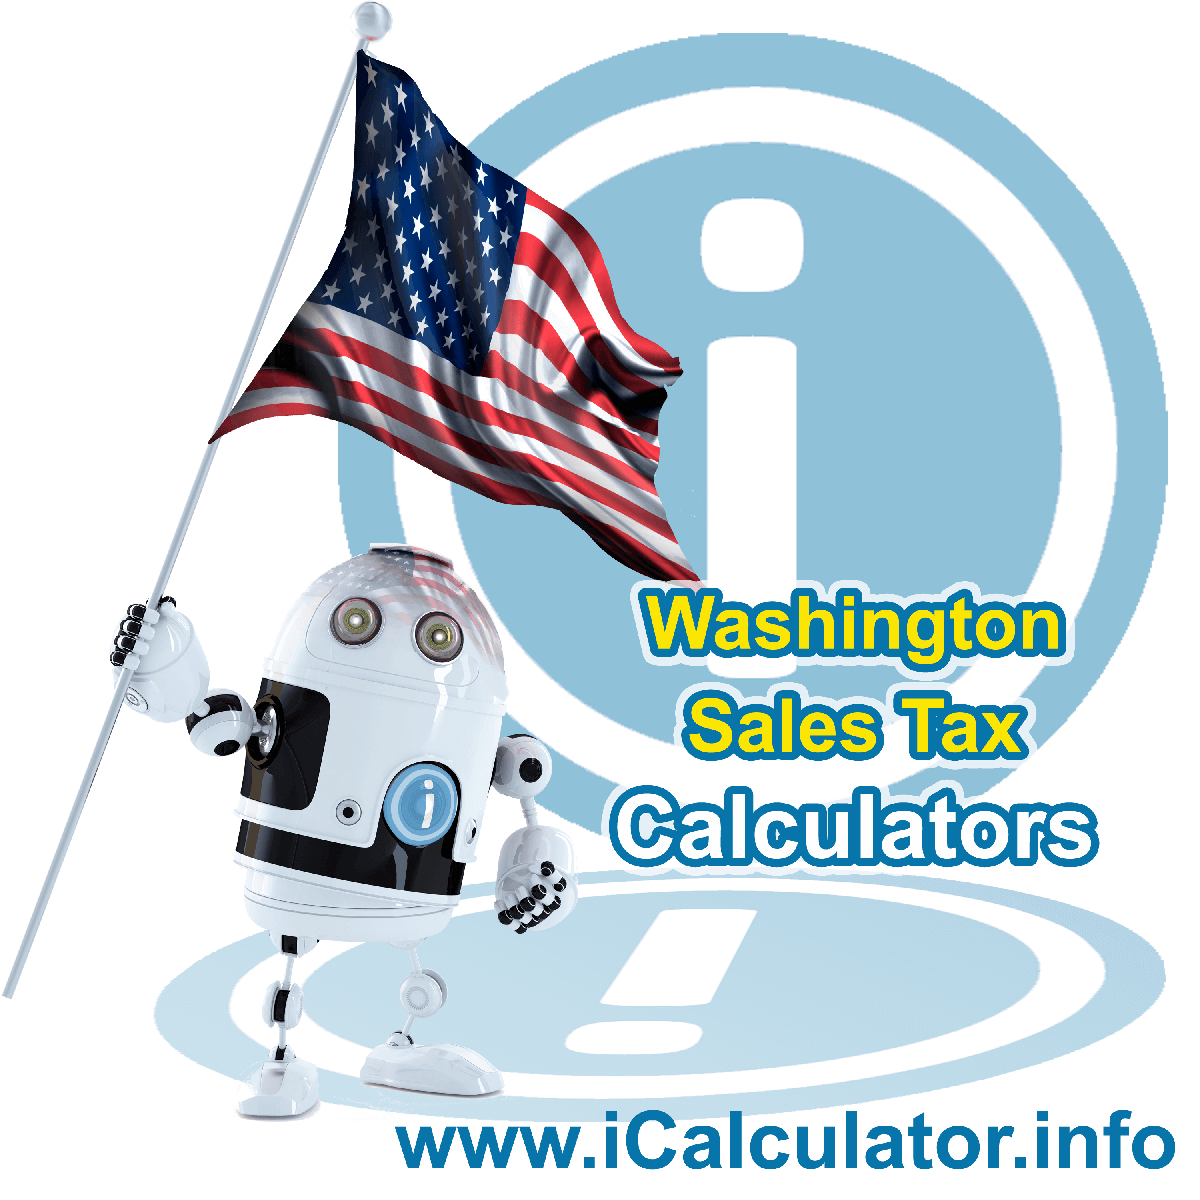 Long Beach Sales Rates: This image illustrates a calculator robot calculating Long Beach sales tax manually using the Long Beach Sales Tax Formula. You can use this information to calculate Long Beach Sales Tax manually or use the Long Beach Sales Tax Calculator to calculate sales tax online.